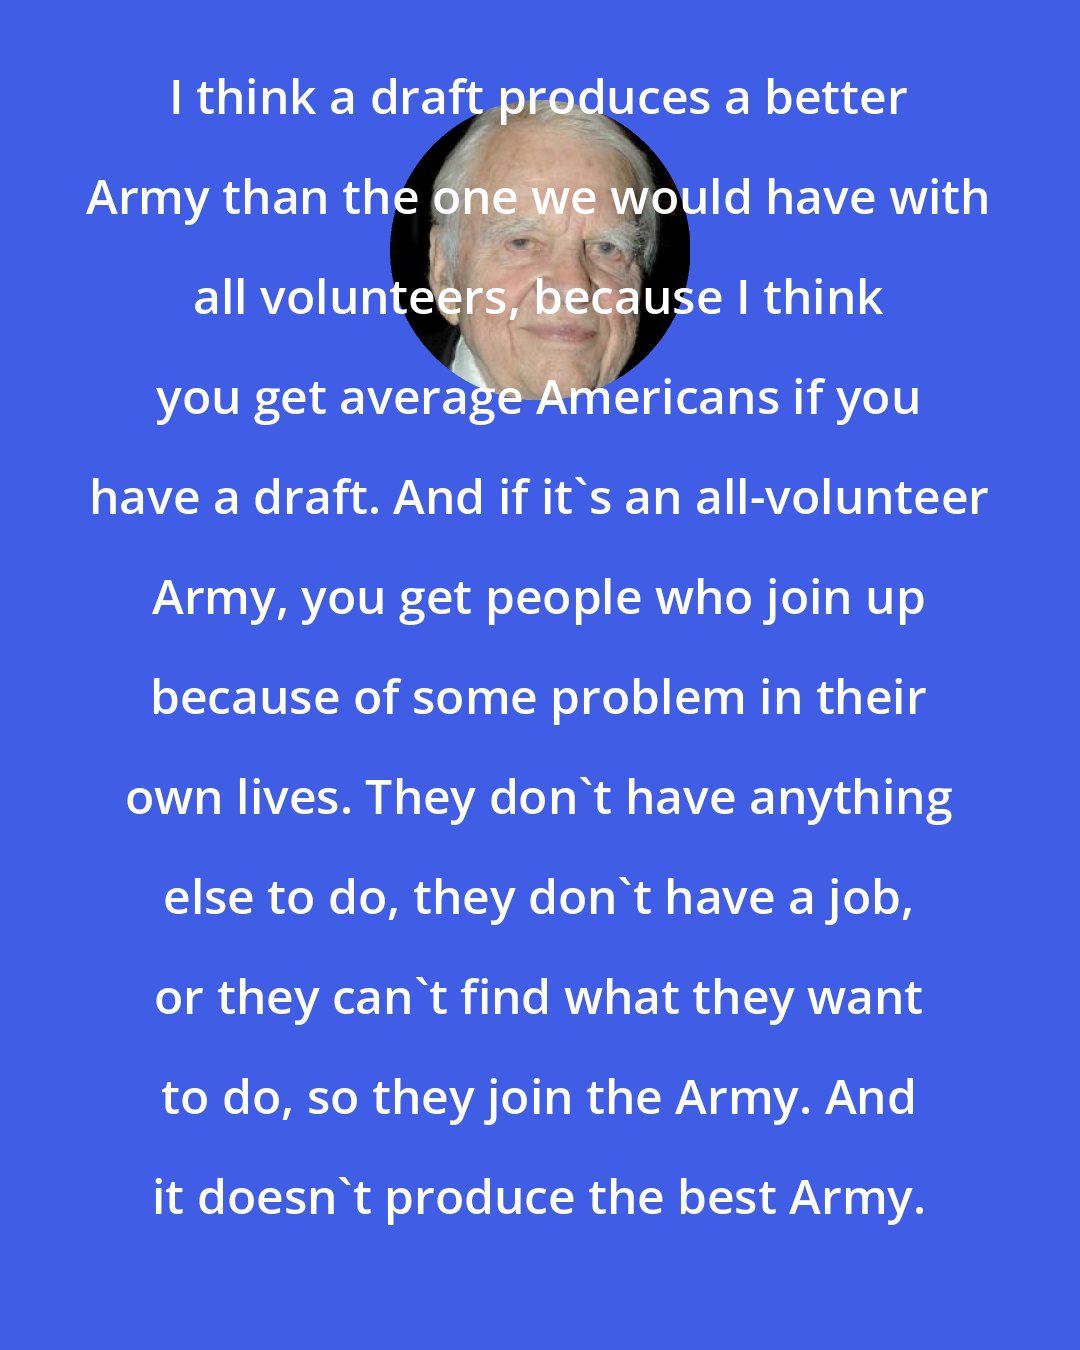 Andy Rooney: I think a draft produces a better Army than the one we would have with all volunteers, because I think you get average Americans if you have a draft. And if it's an all-volunteer Army, you get people who join up because of some problem in their own lives. They don't have anything else to do, they don't have a job, or they can't find what they want to do, so they join the Army. And it doesn't produce the best Army.